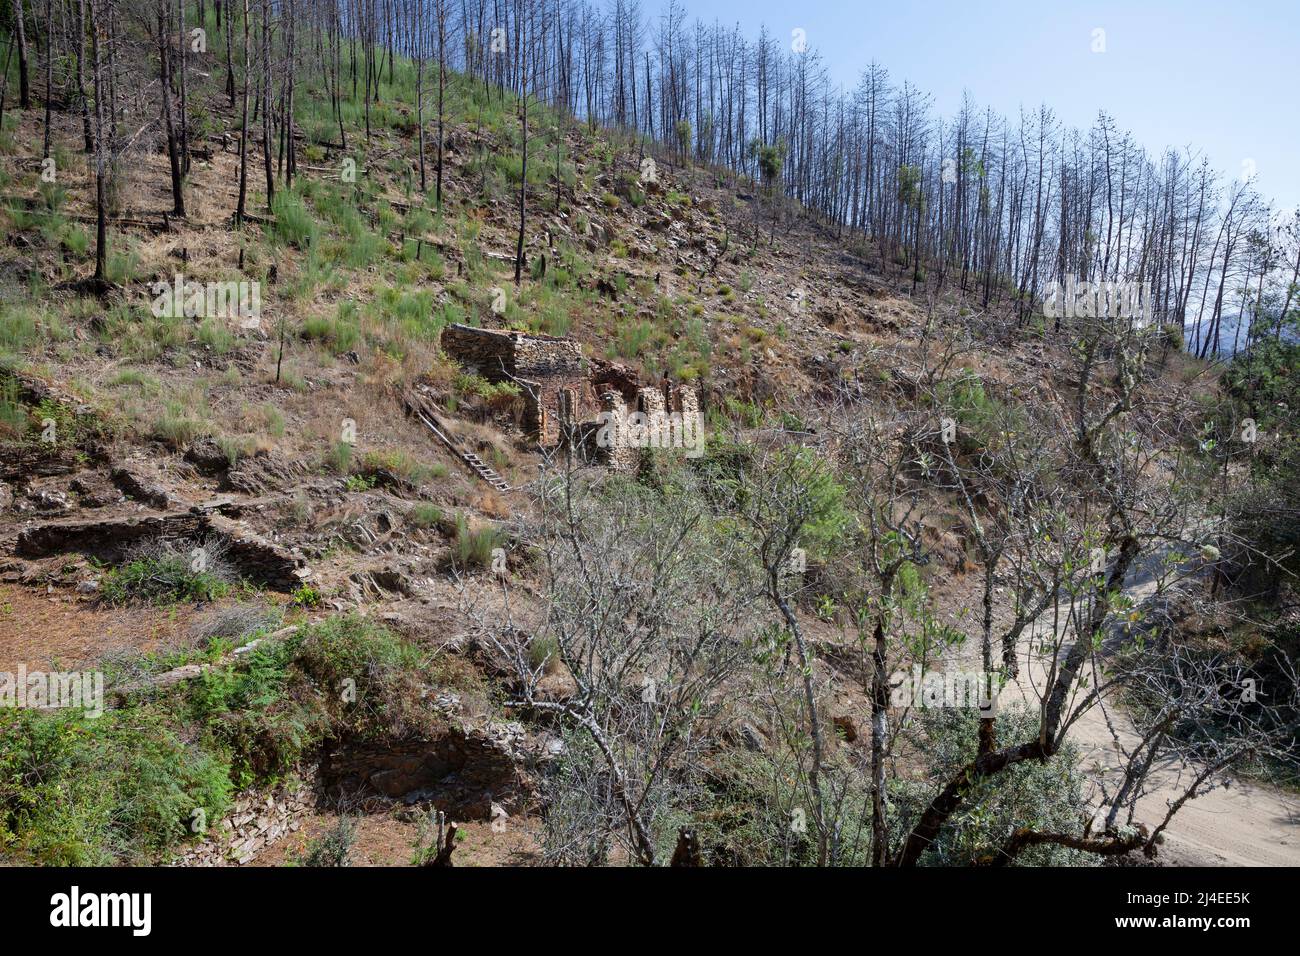 Europe, Portugal, District of Coimbra,Near Góis, 'The Goatshed' Ruins (near Colmeal) below scorched Pine Trees on Hillside after the devastating fires Stock Photo